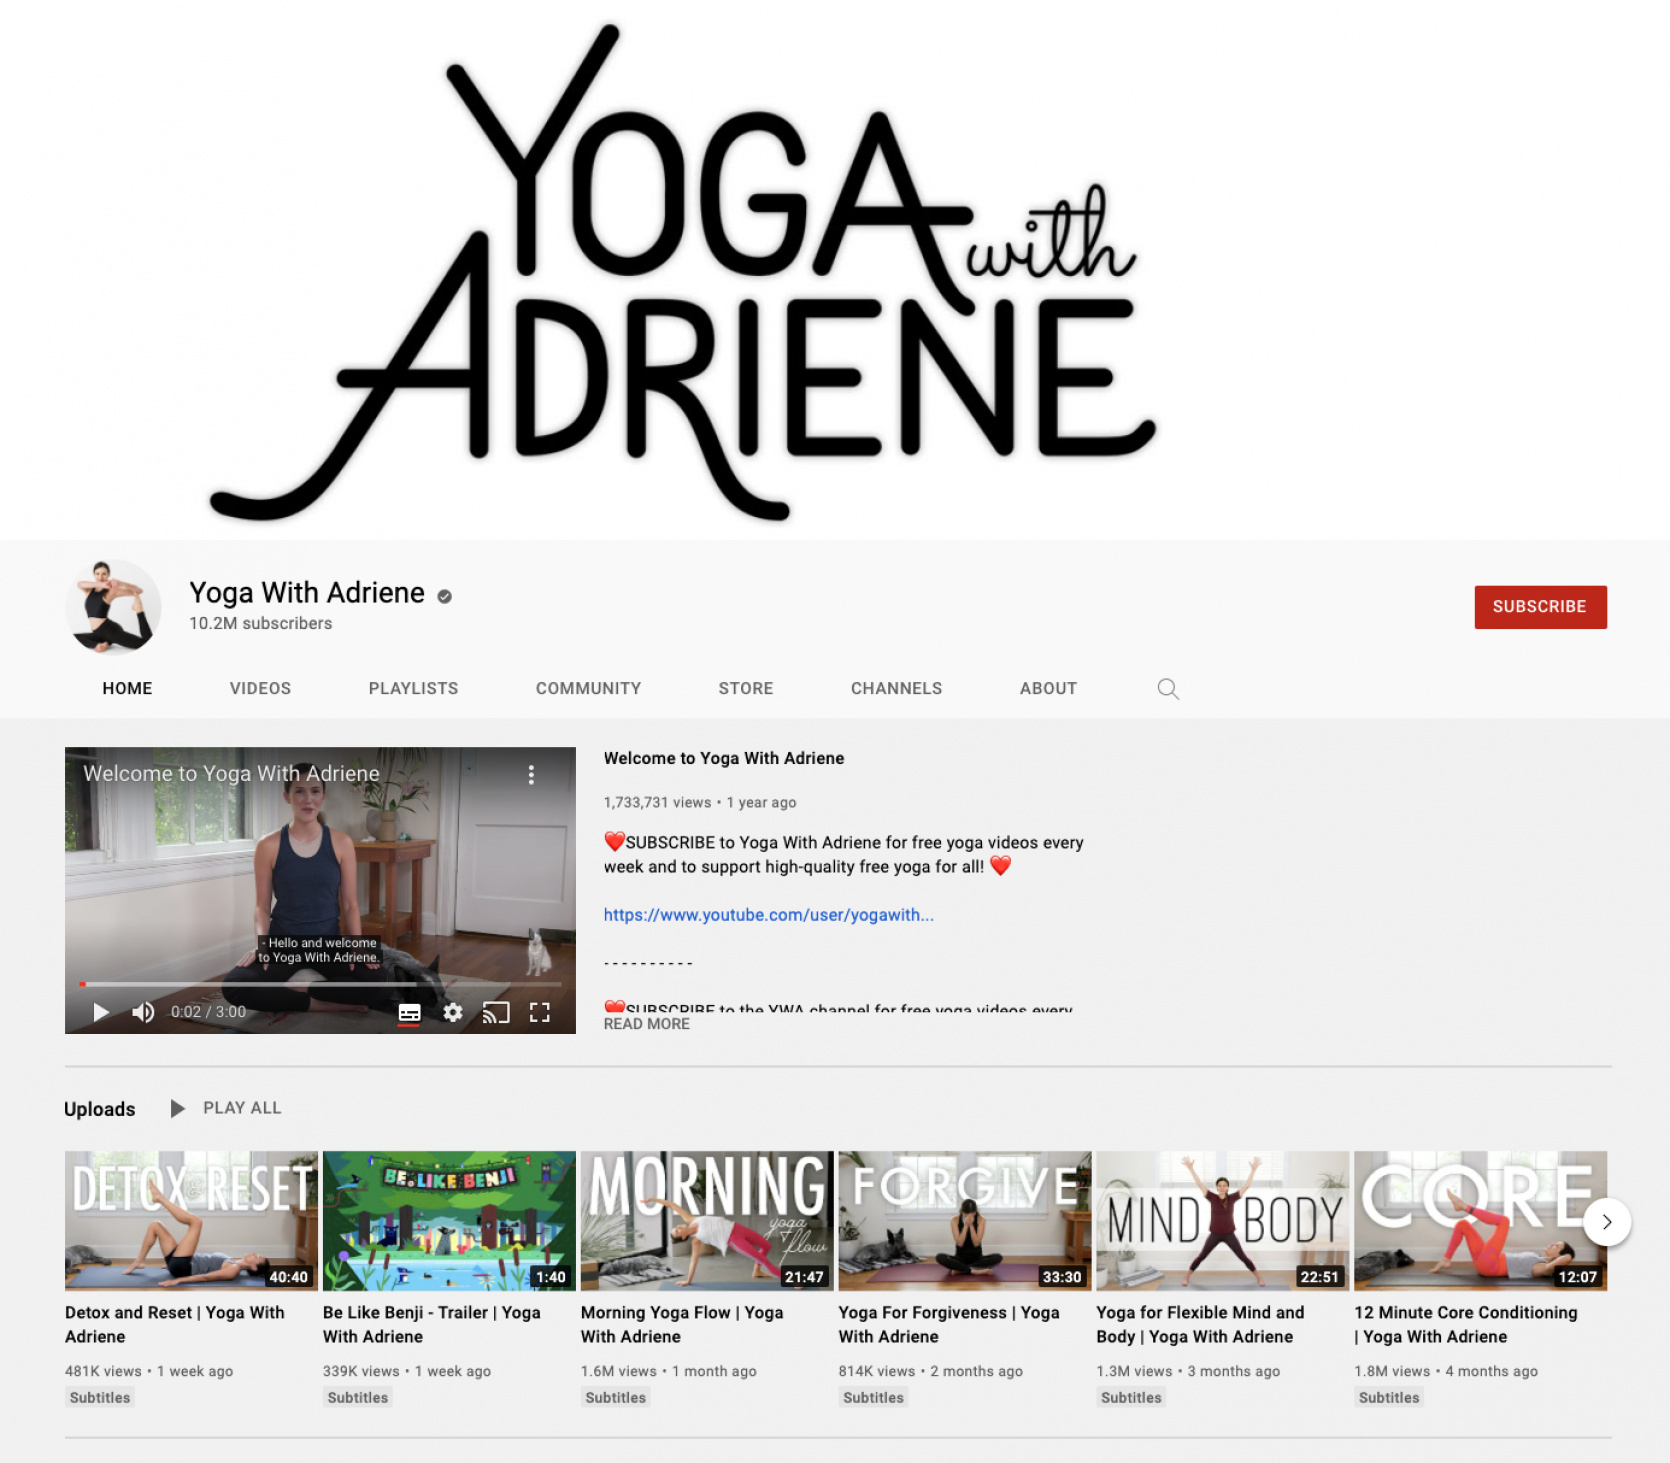 Yoga with Adriene Youtube Channel, 30 day Challenge, Morning